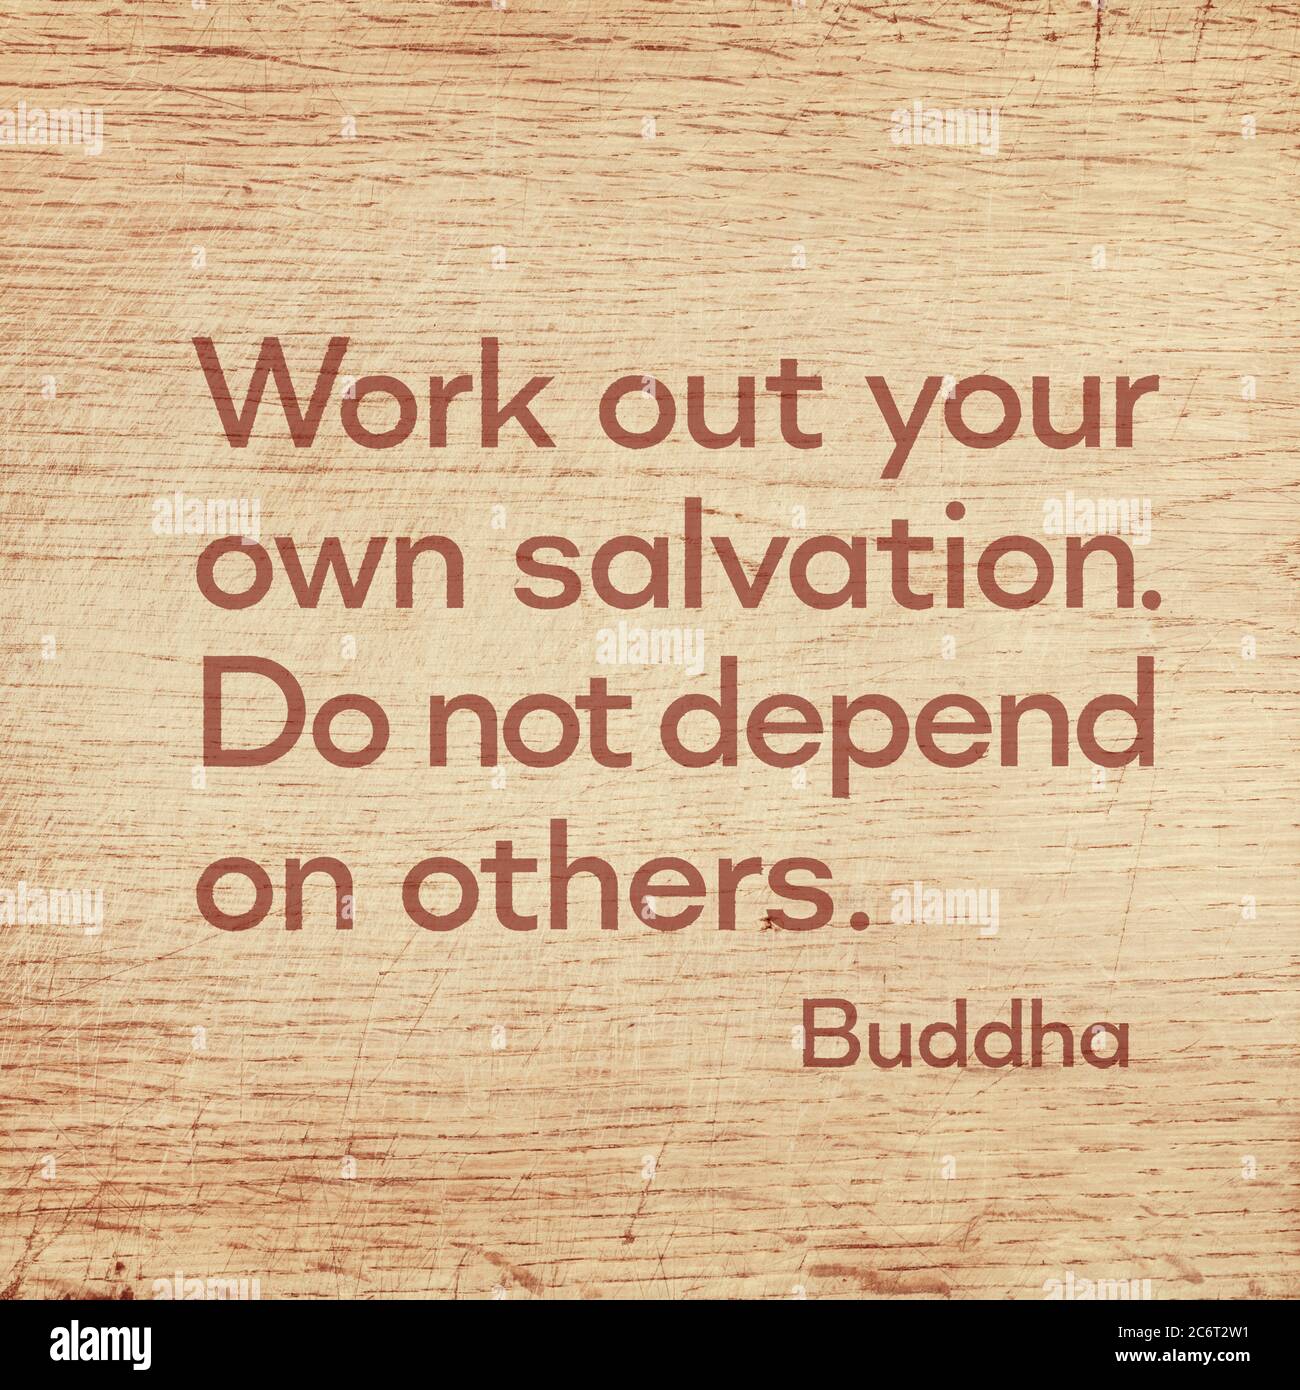 Work out your own salvation. Do not depend on others - famous quote of Gautama Buddha printed on grunge wooden board Stock Photo